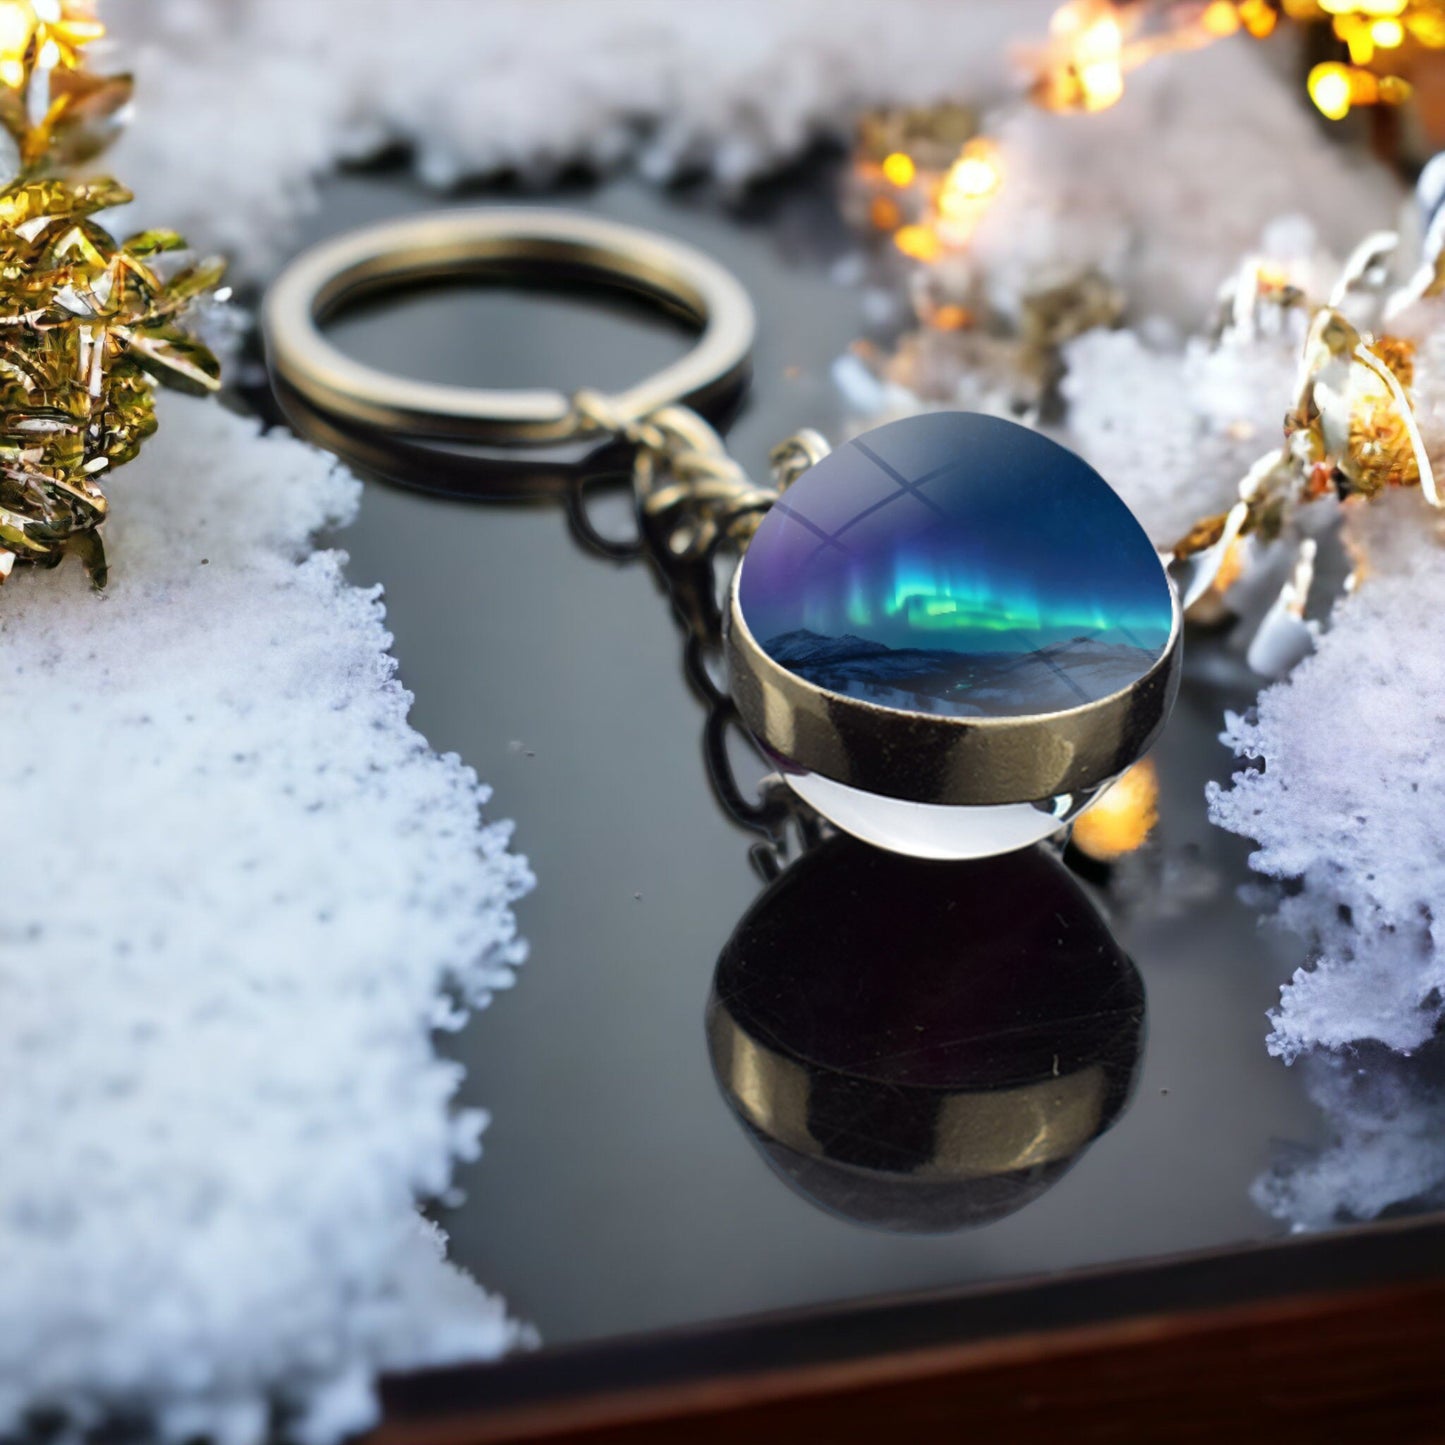 Unique Aurora Borealis Keyring - Northern Light Jewelry - Double Side Glass Ball Key Chain - Perfect Aurora Lovers Gift 31